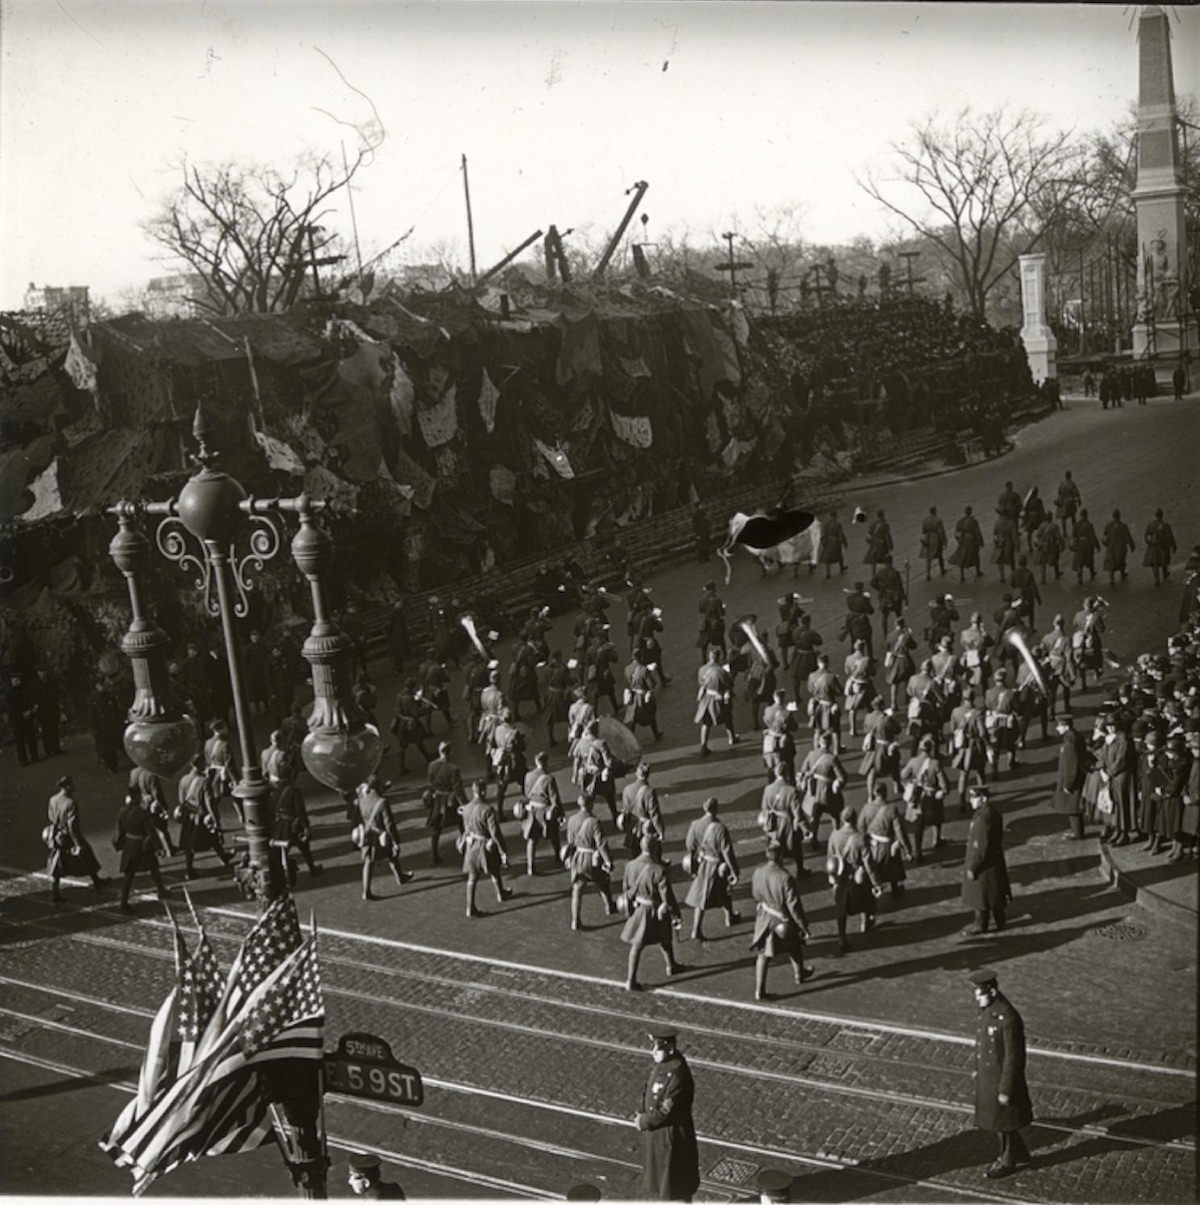 Soldiers on parade, marching north on Fifth Avenue. Note the street sign on the light pole: 59th Street and 5th Avenue. A part of the Arch of Jewels is visible at top right.